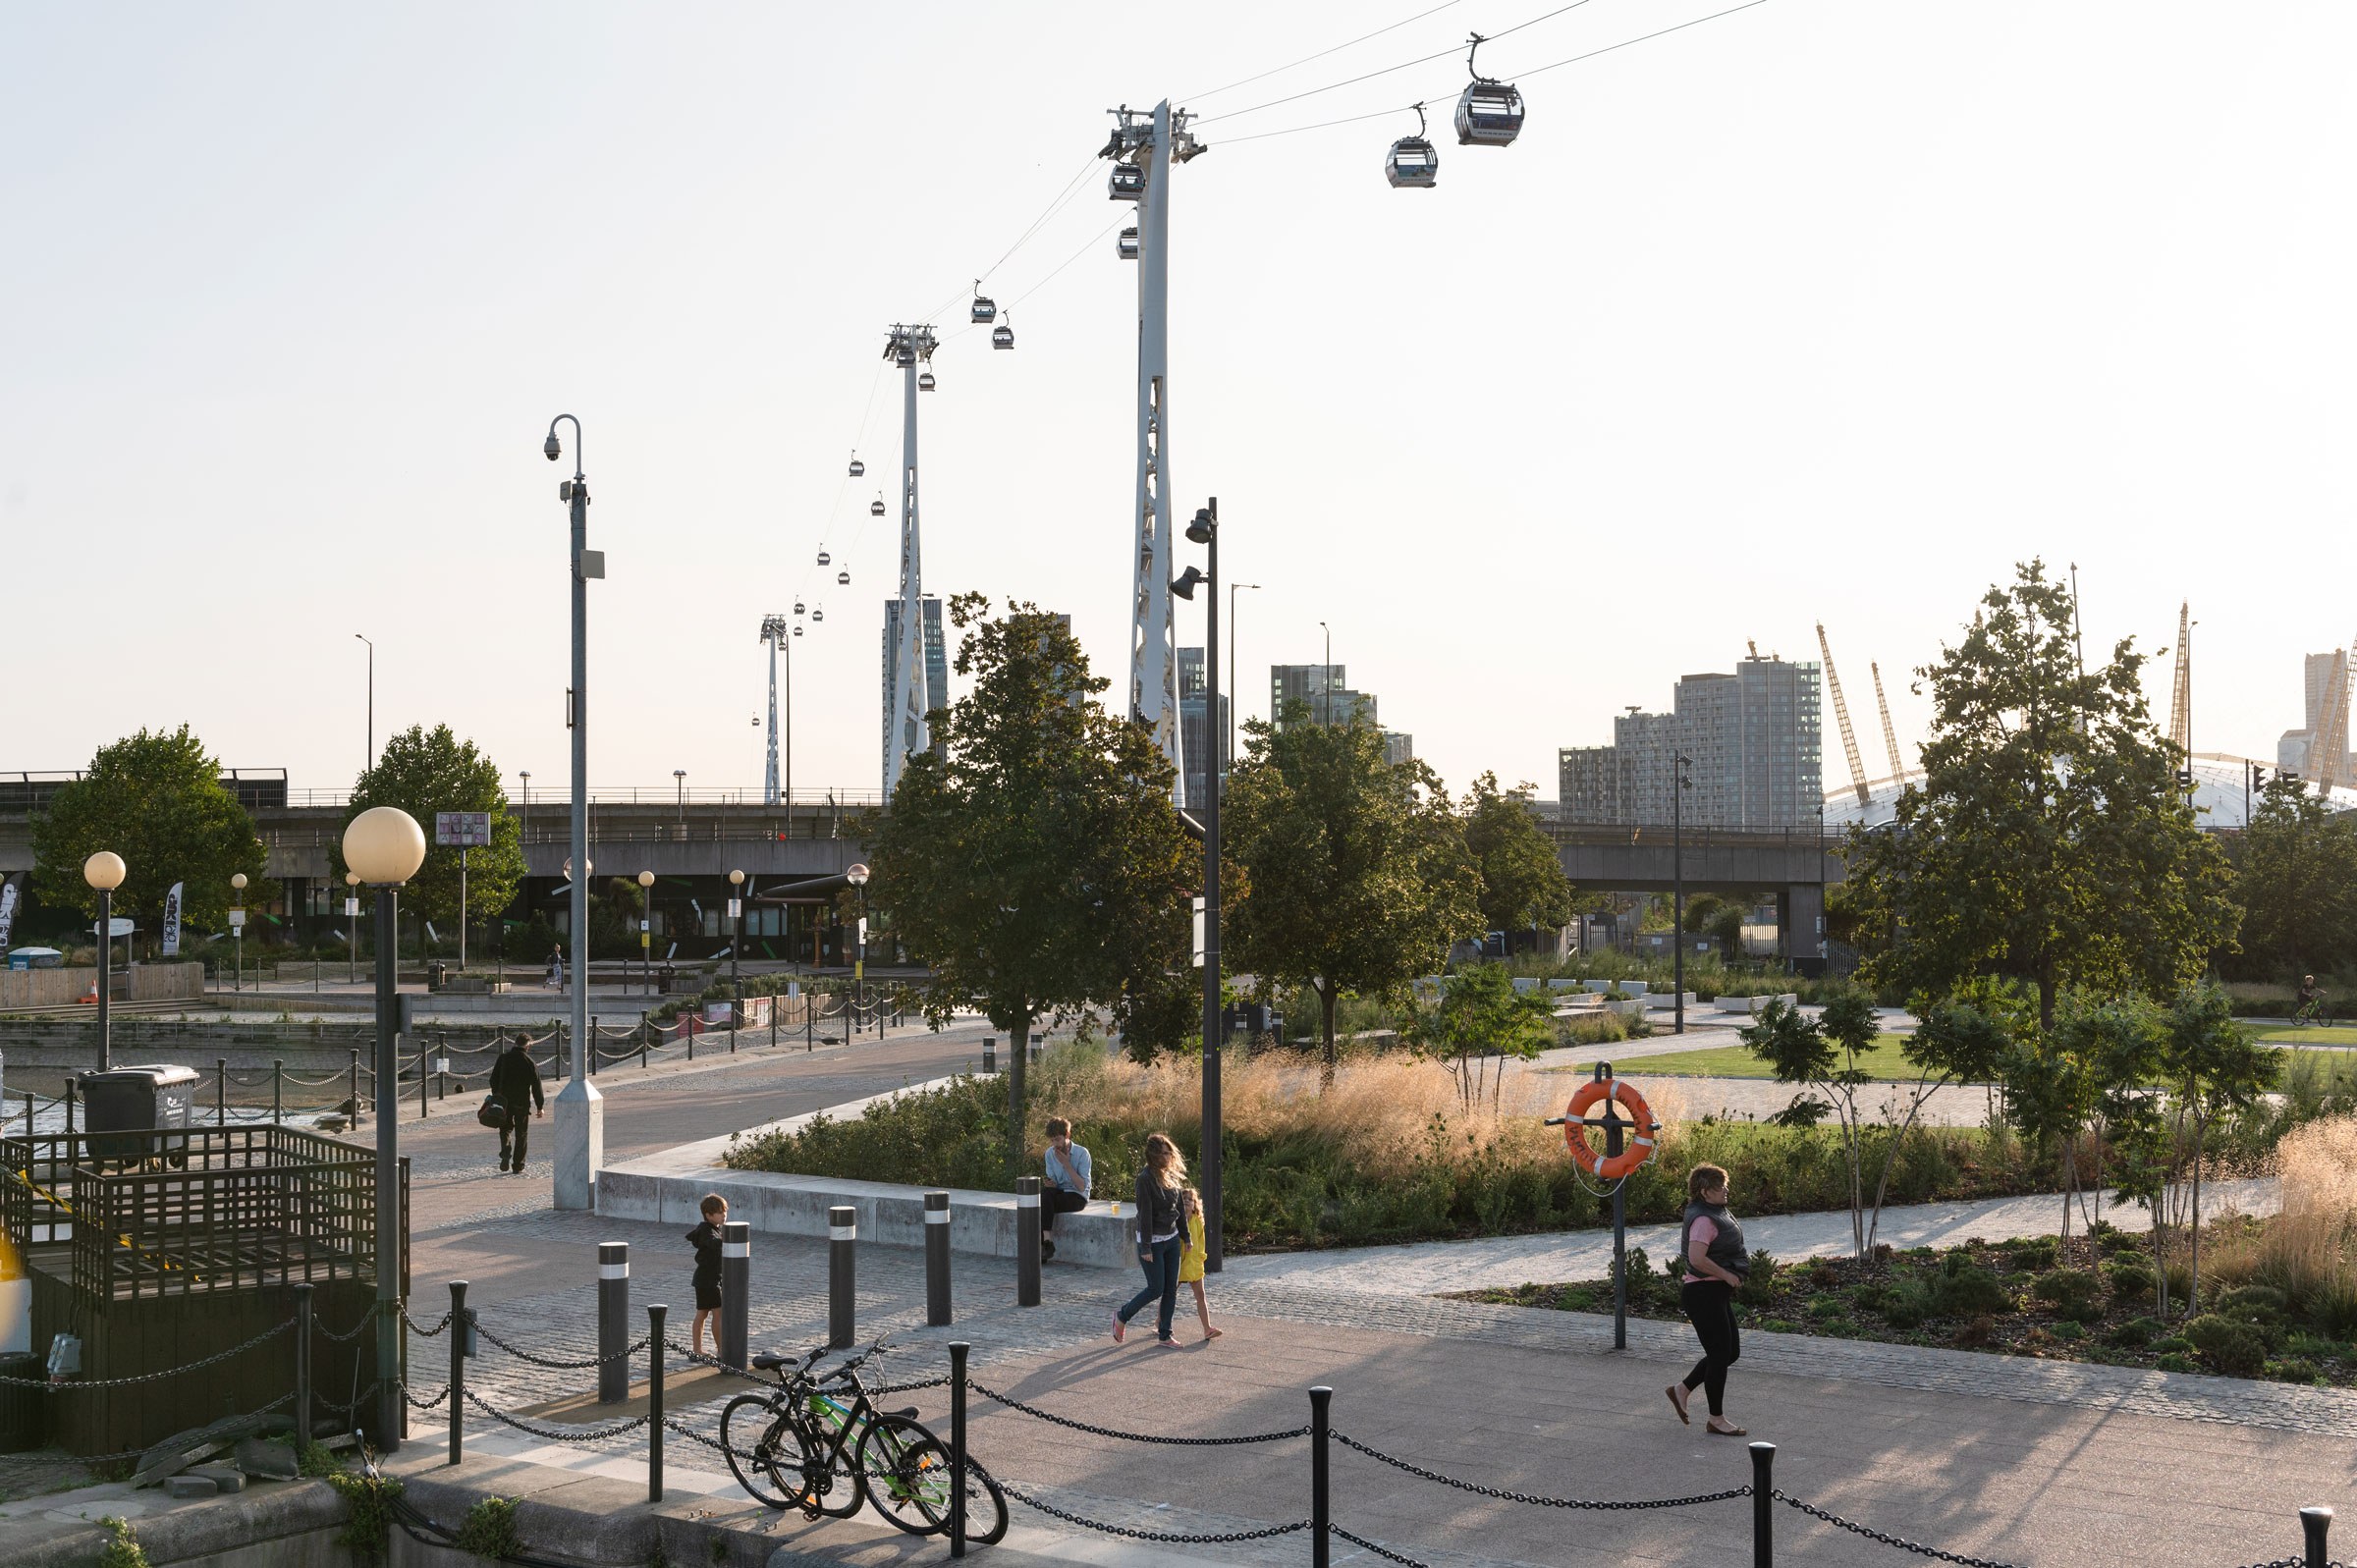 Scenic view of Royal Victoria Docks with people and cable cars overhead